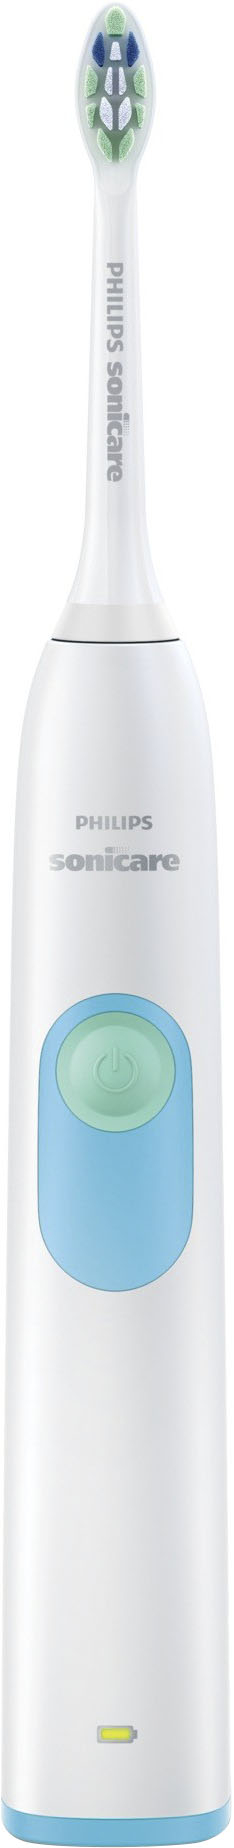 Philips Sonicare - Sonicare 2 Series Plaque Control Rechargeable Electric Toothbrush - White